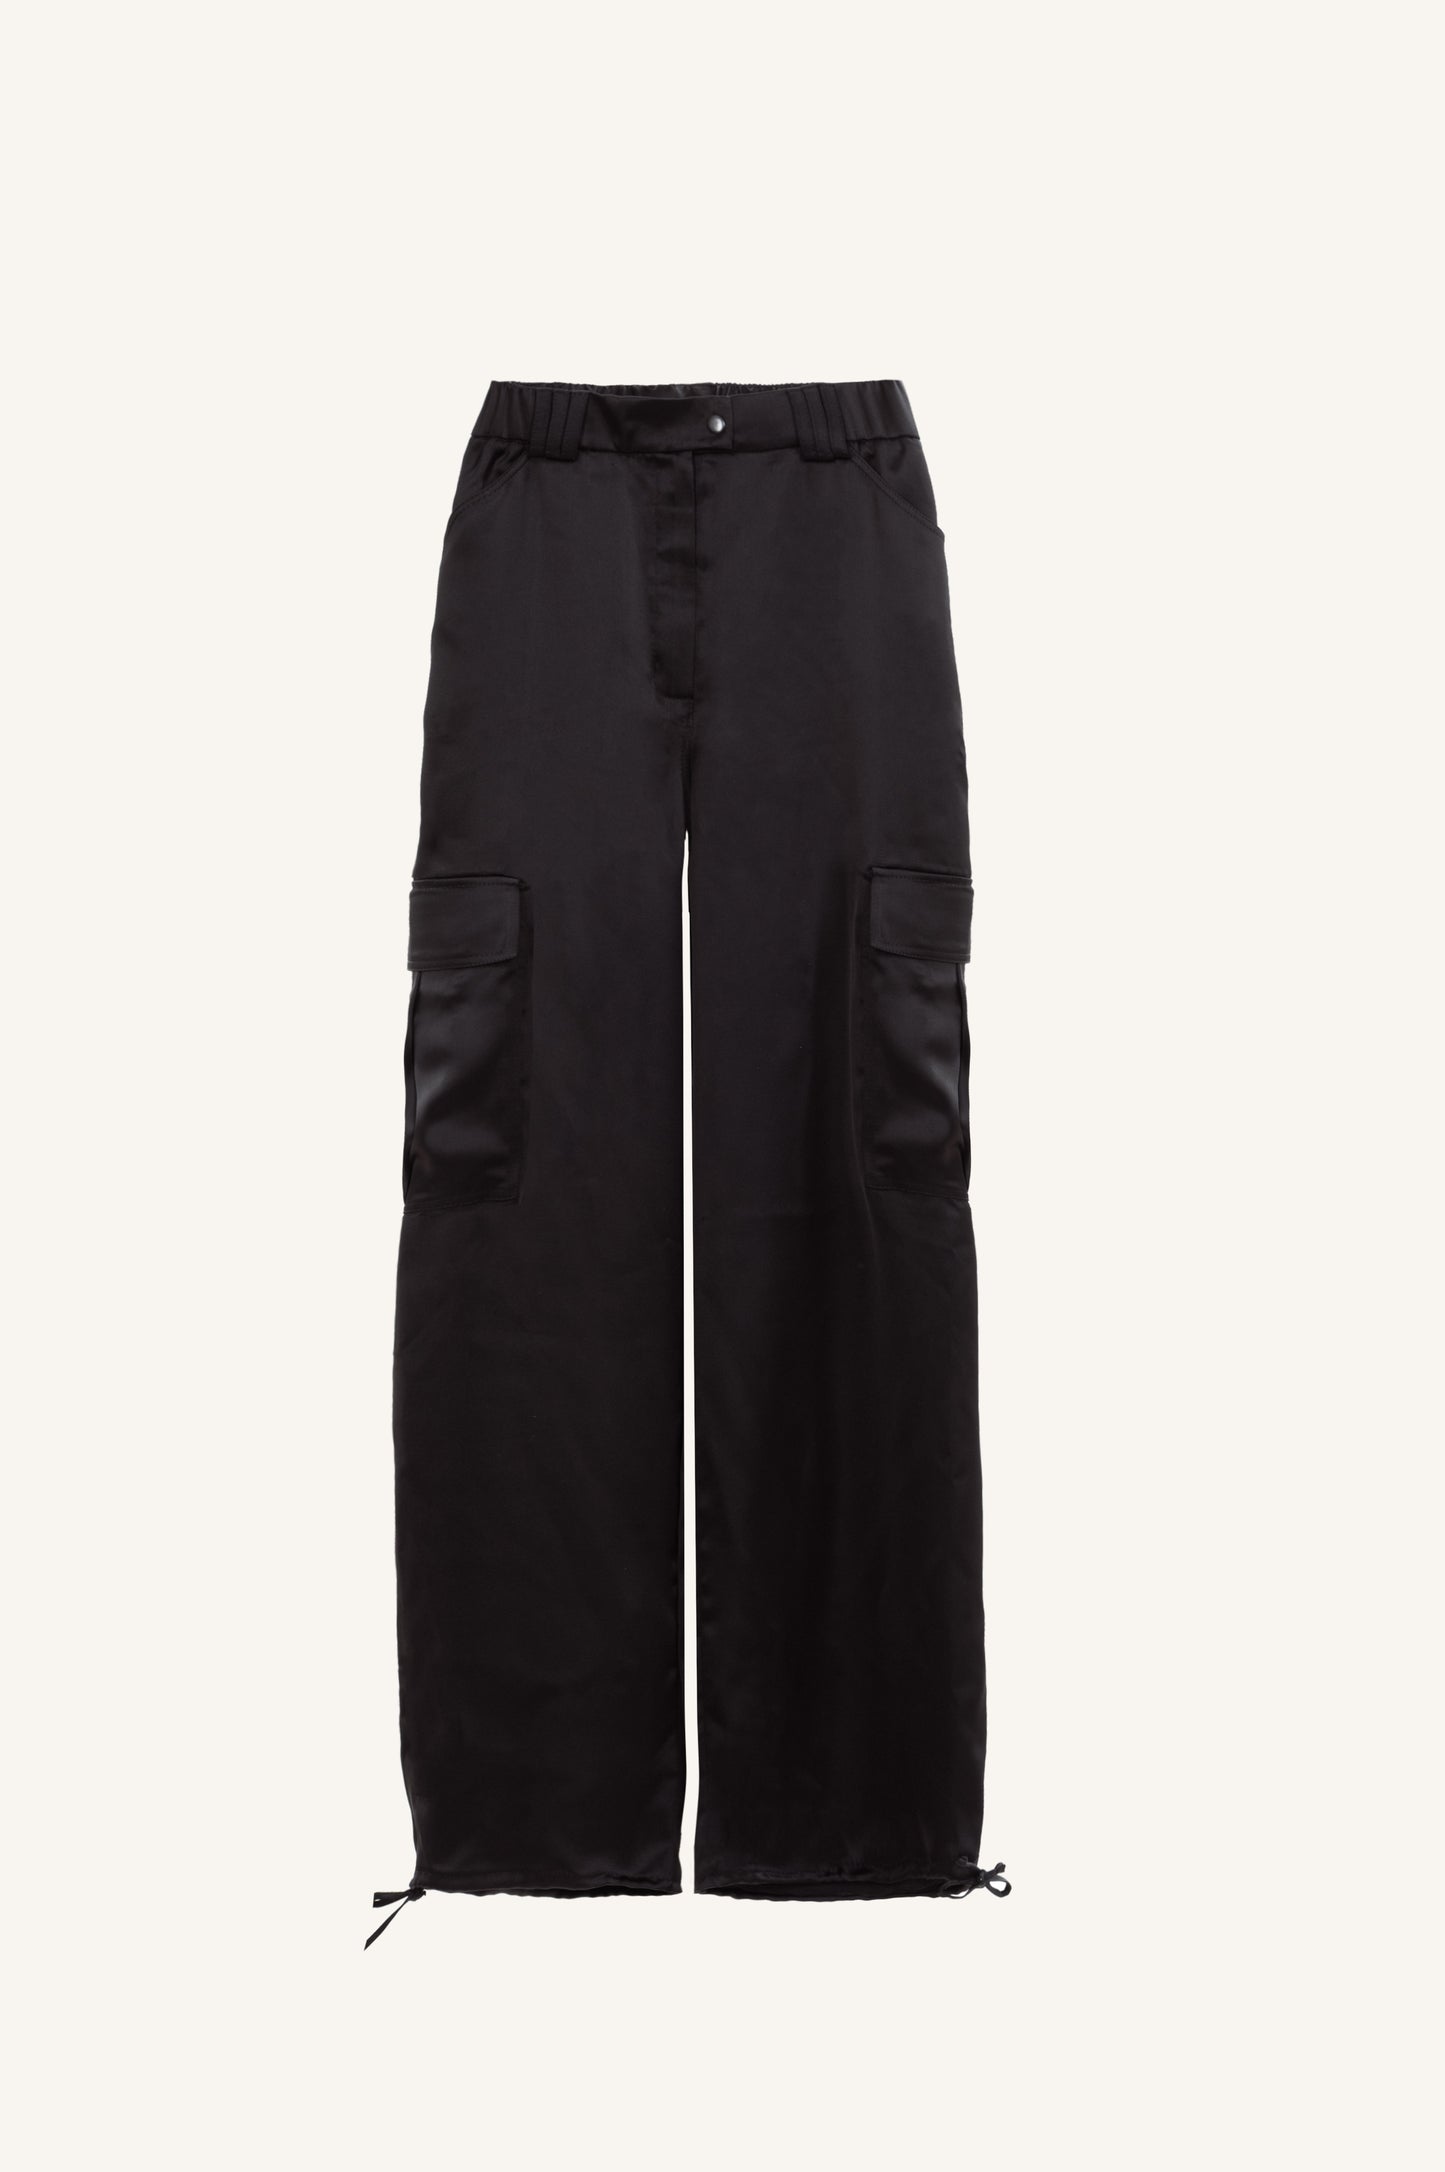 SILKY CARGO PANTS WITH SOLDIERLIKE POCKETS